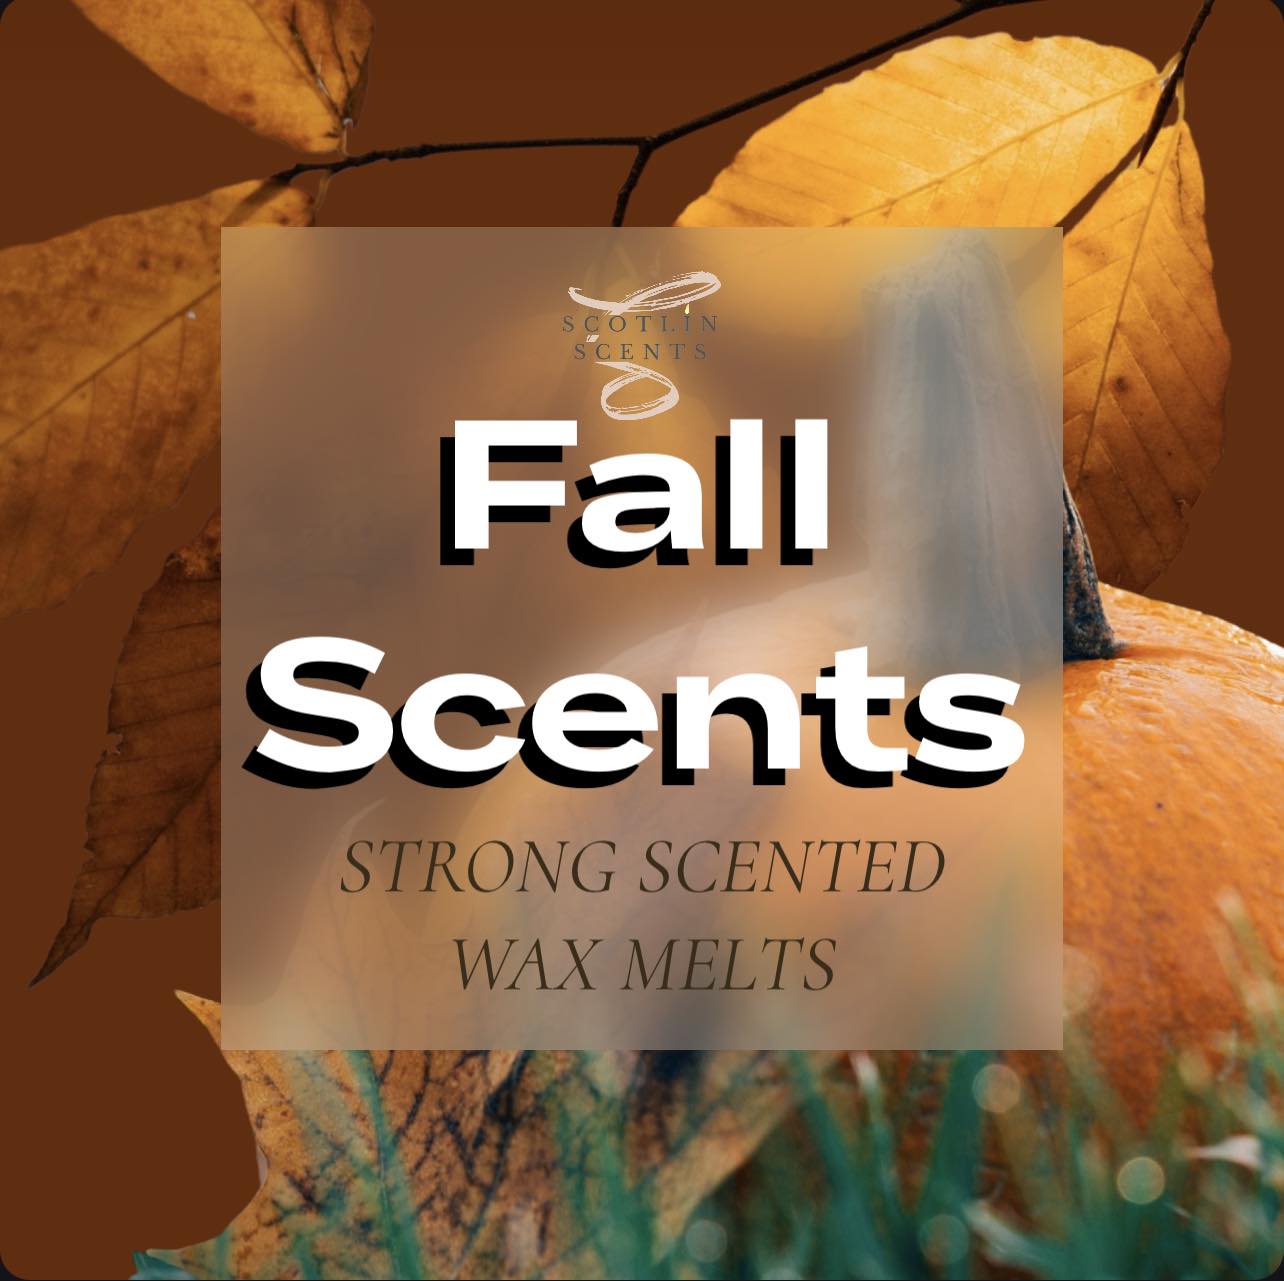 Fall Festival Scented Wax Melts, Better Homes & Gardens, 2.5 oz (1